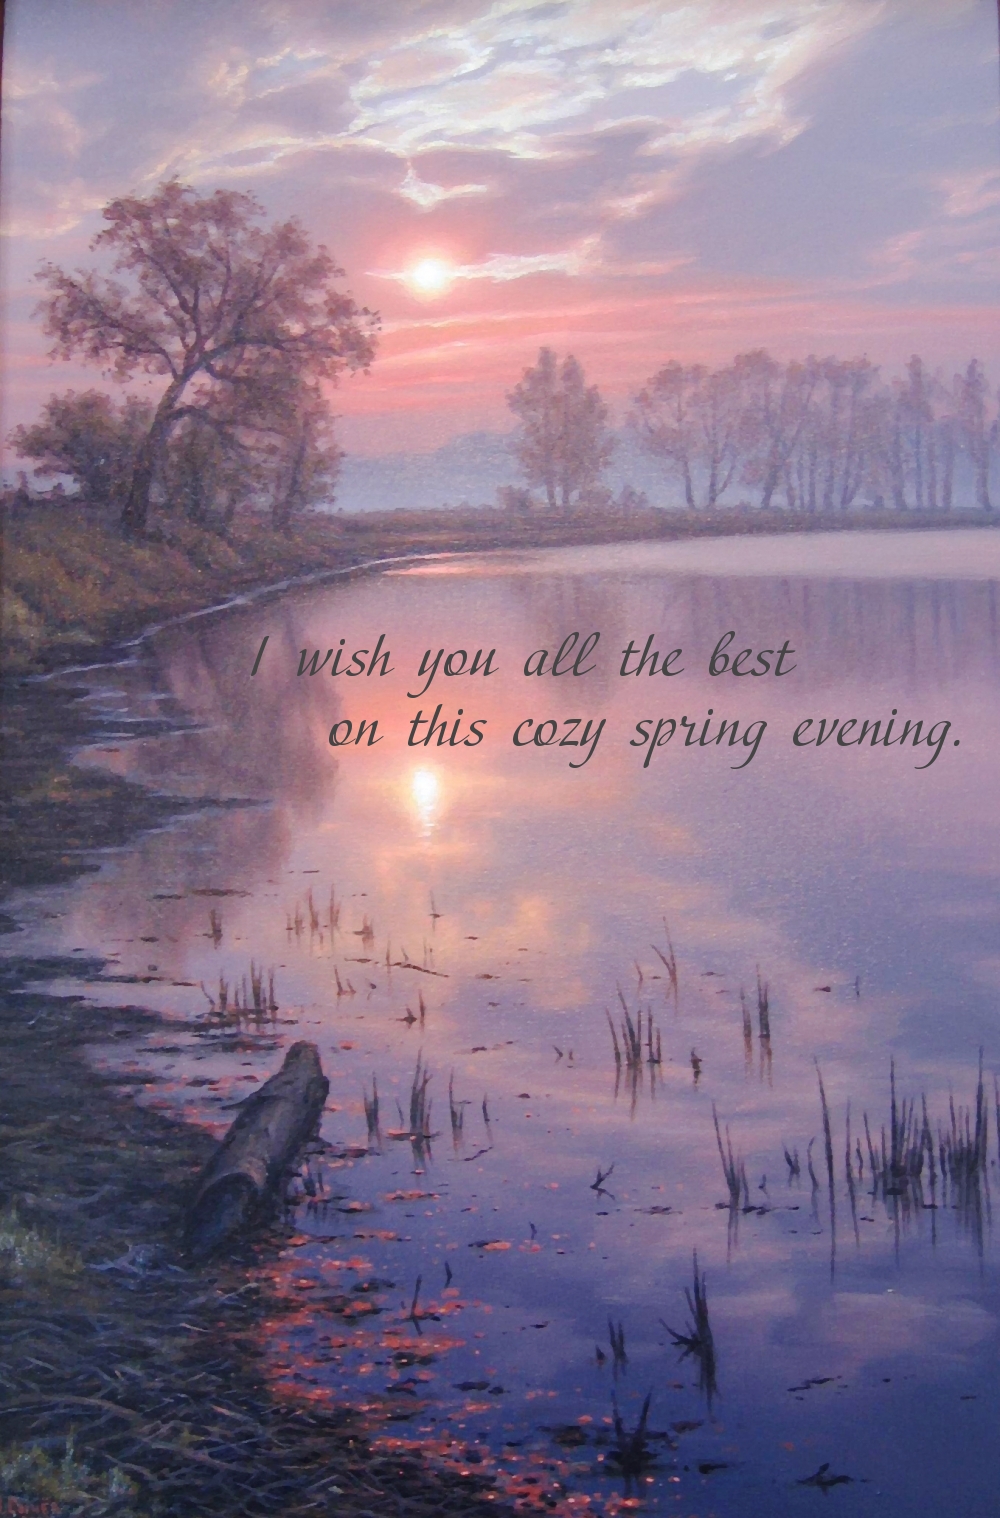 I wish you all the best on this cozy spring evening.